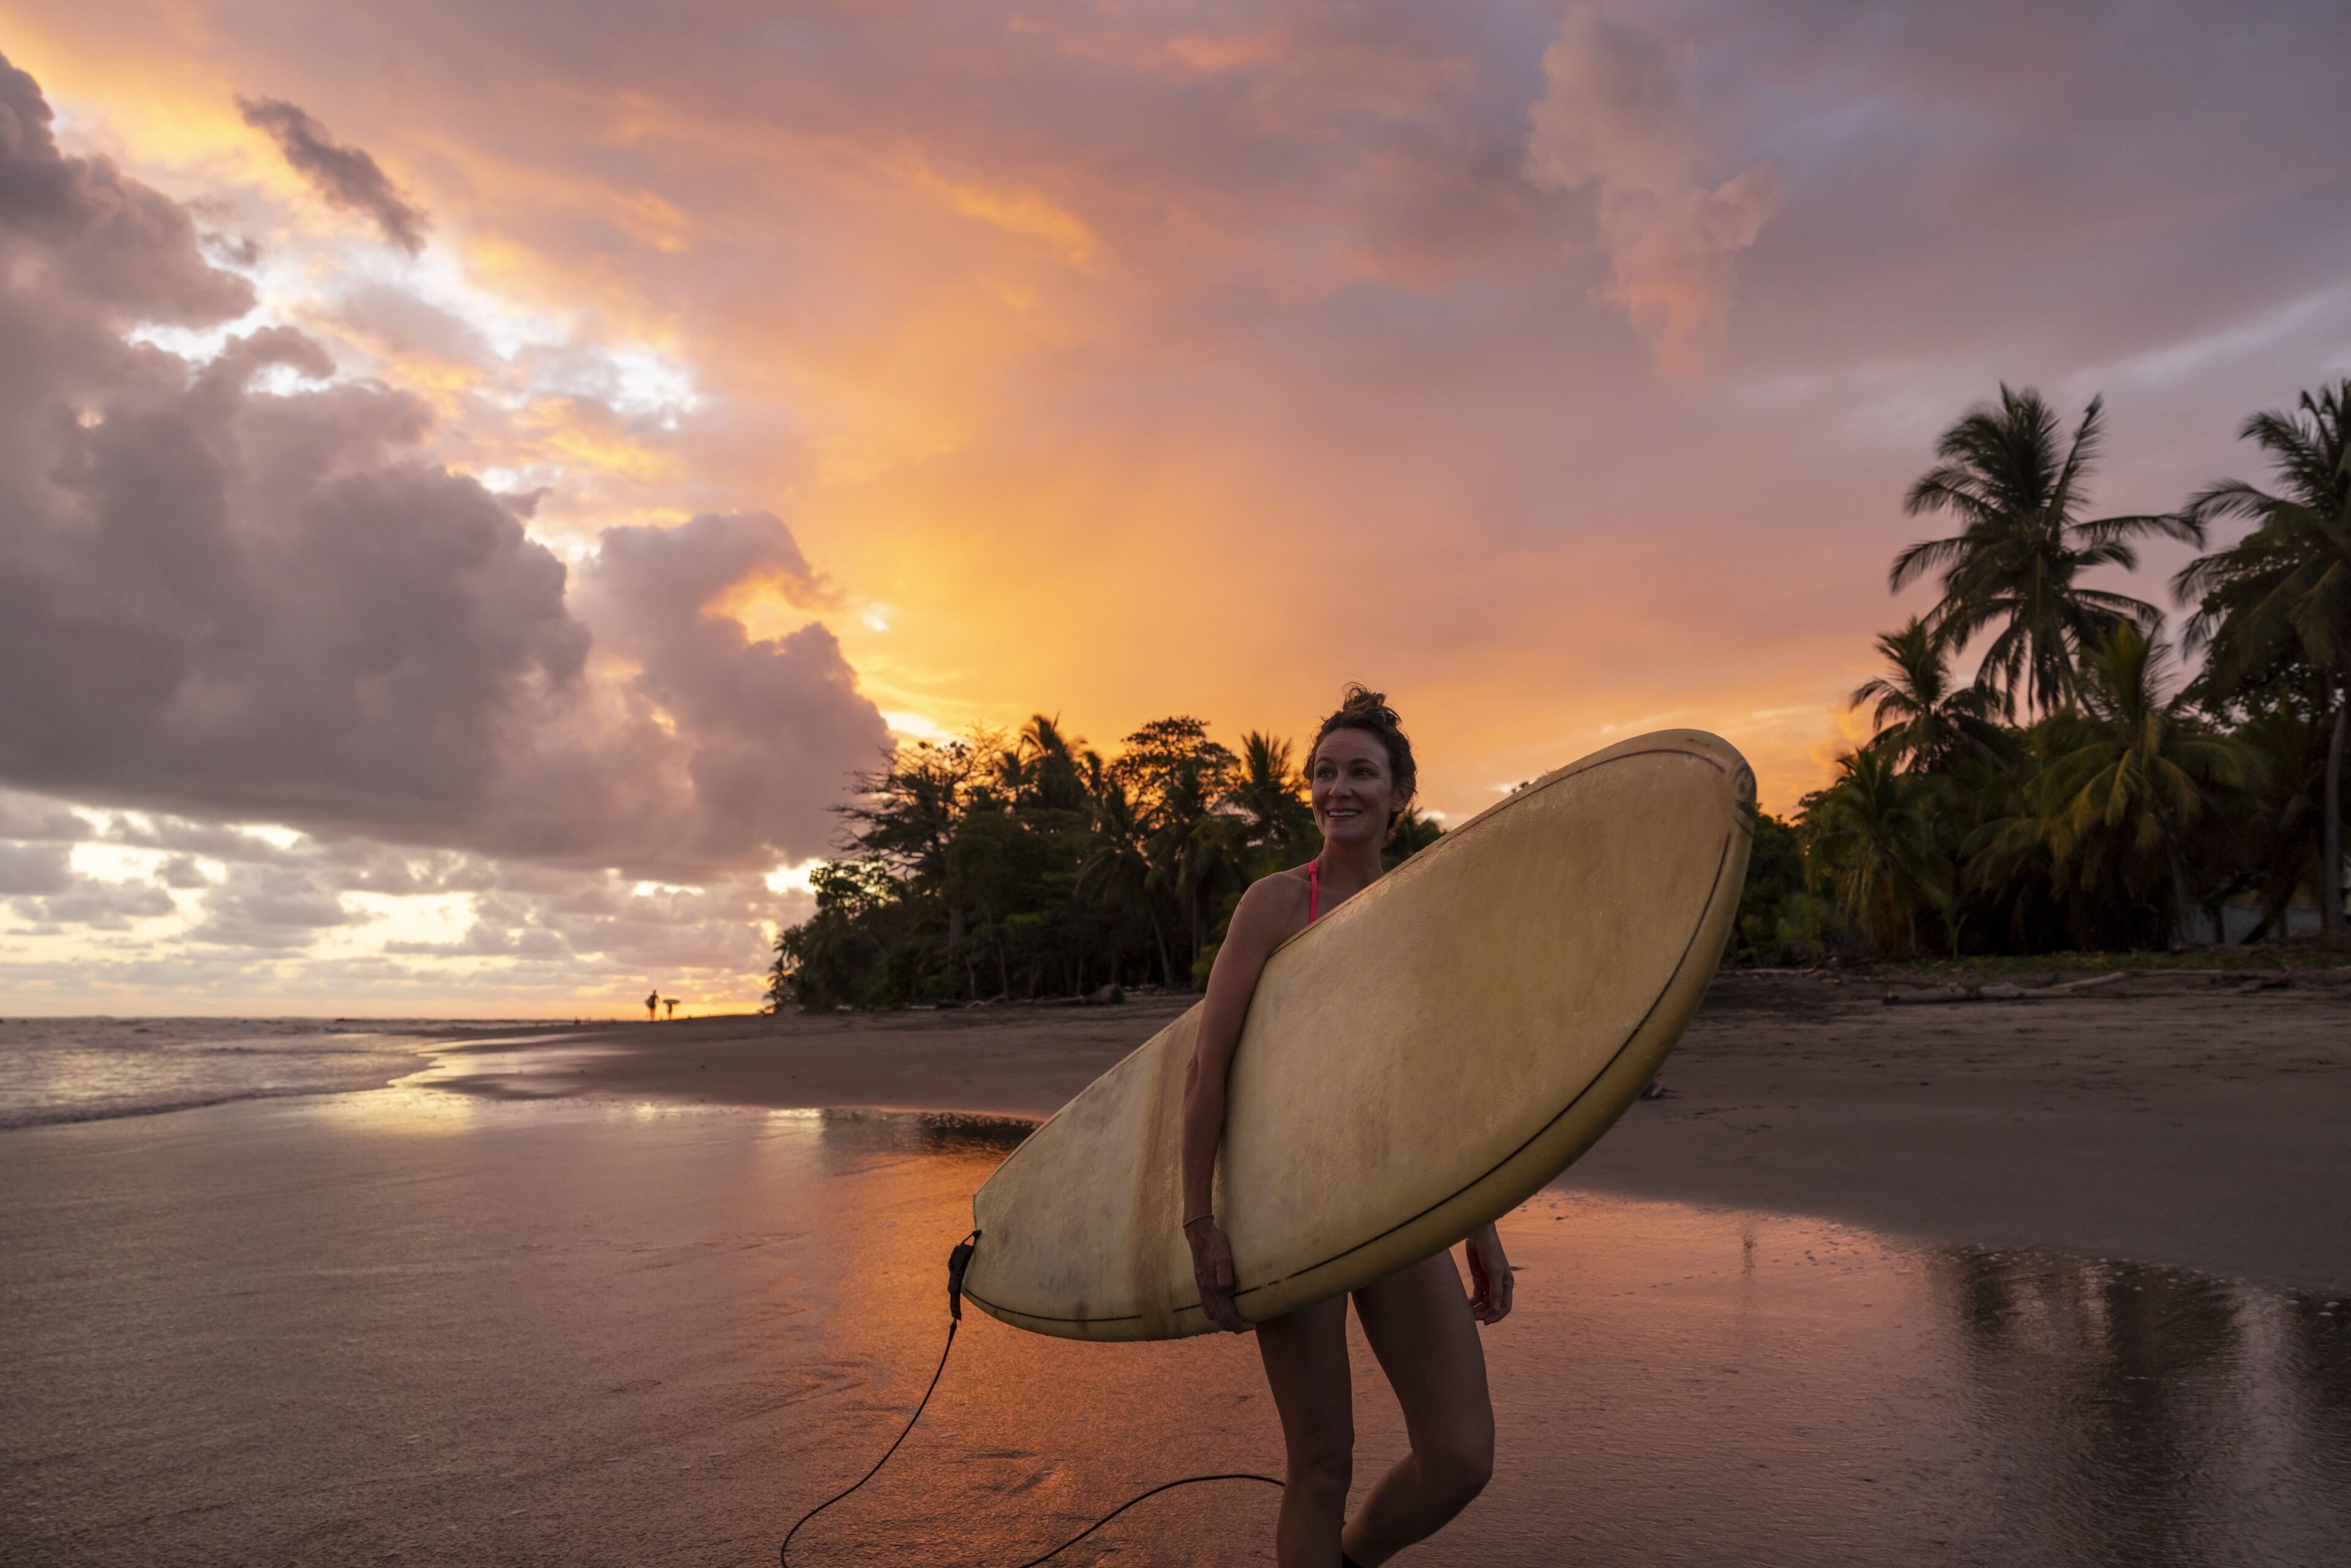 A woman walking with a surfboard during a dramatic sunset at the beach.